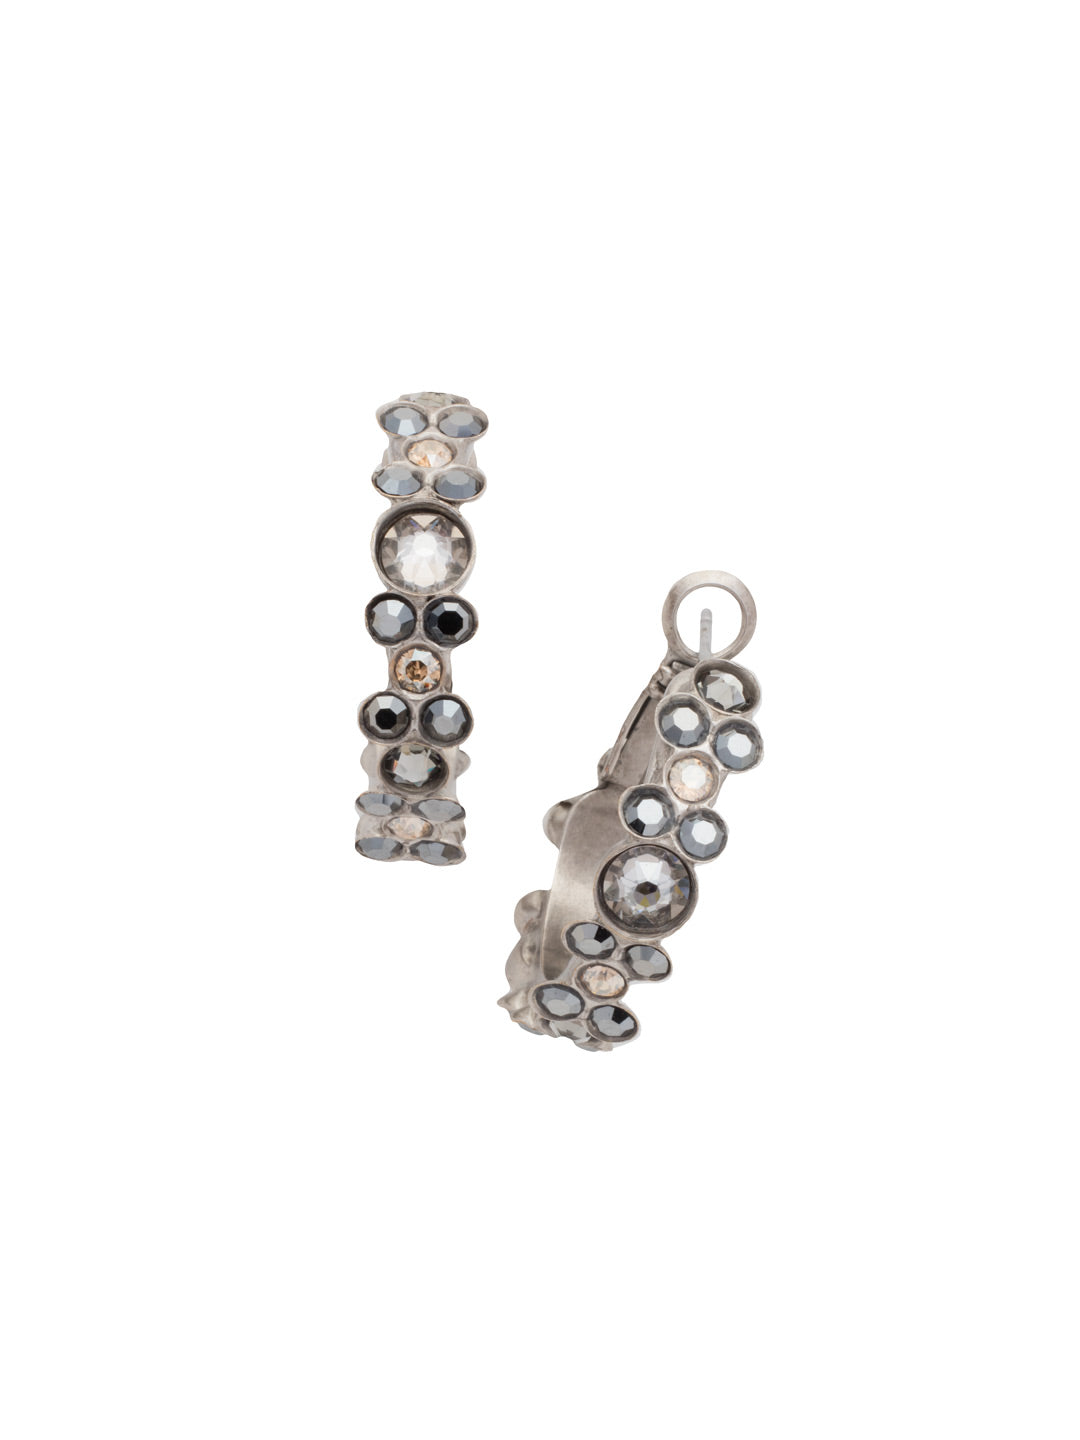 Floral Hoop Earrings - EBP15ASGV - <p>Intricate design, infused with gorgeous shine. A motif of floral clusters is featured here on a small, delicate hoop with a hinged post backing. From Sorrelli's Gold Vermeil collection in our Antique Silver-tone finish.</p>